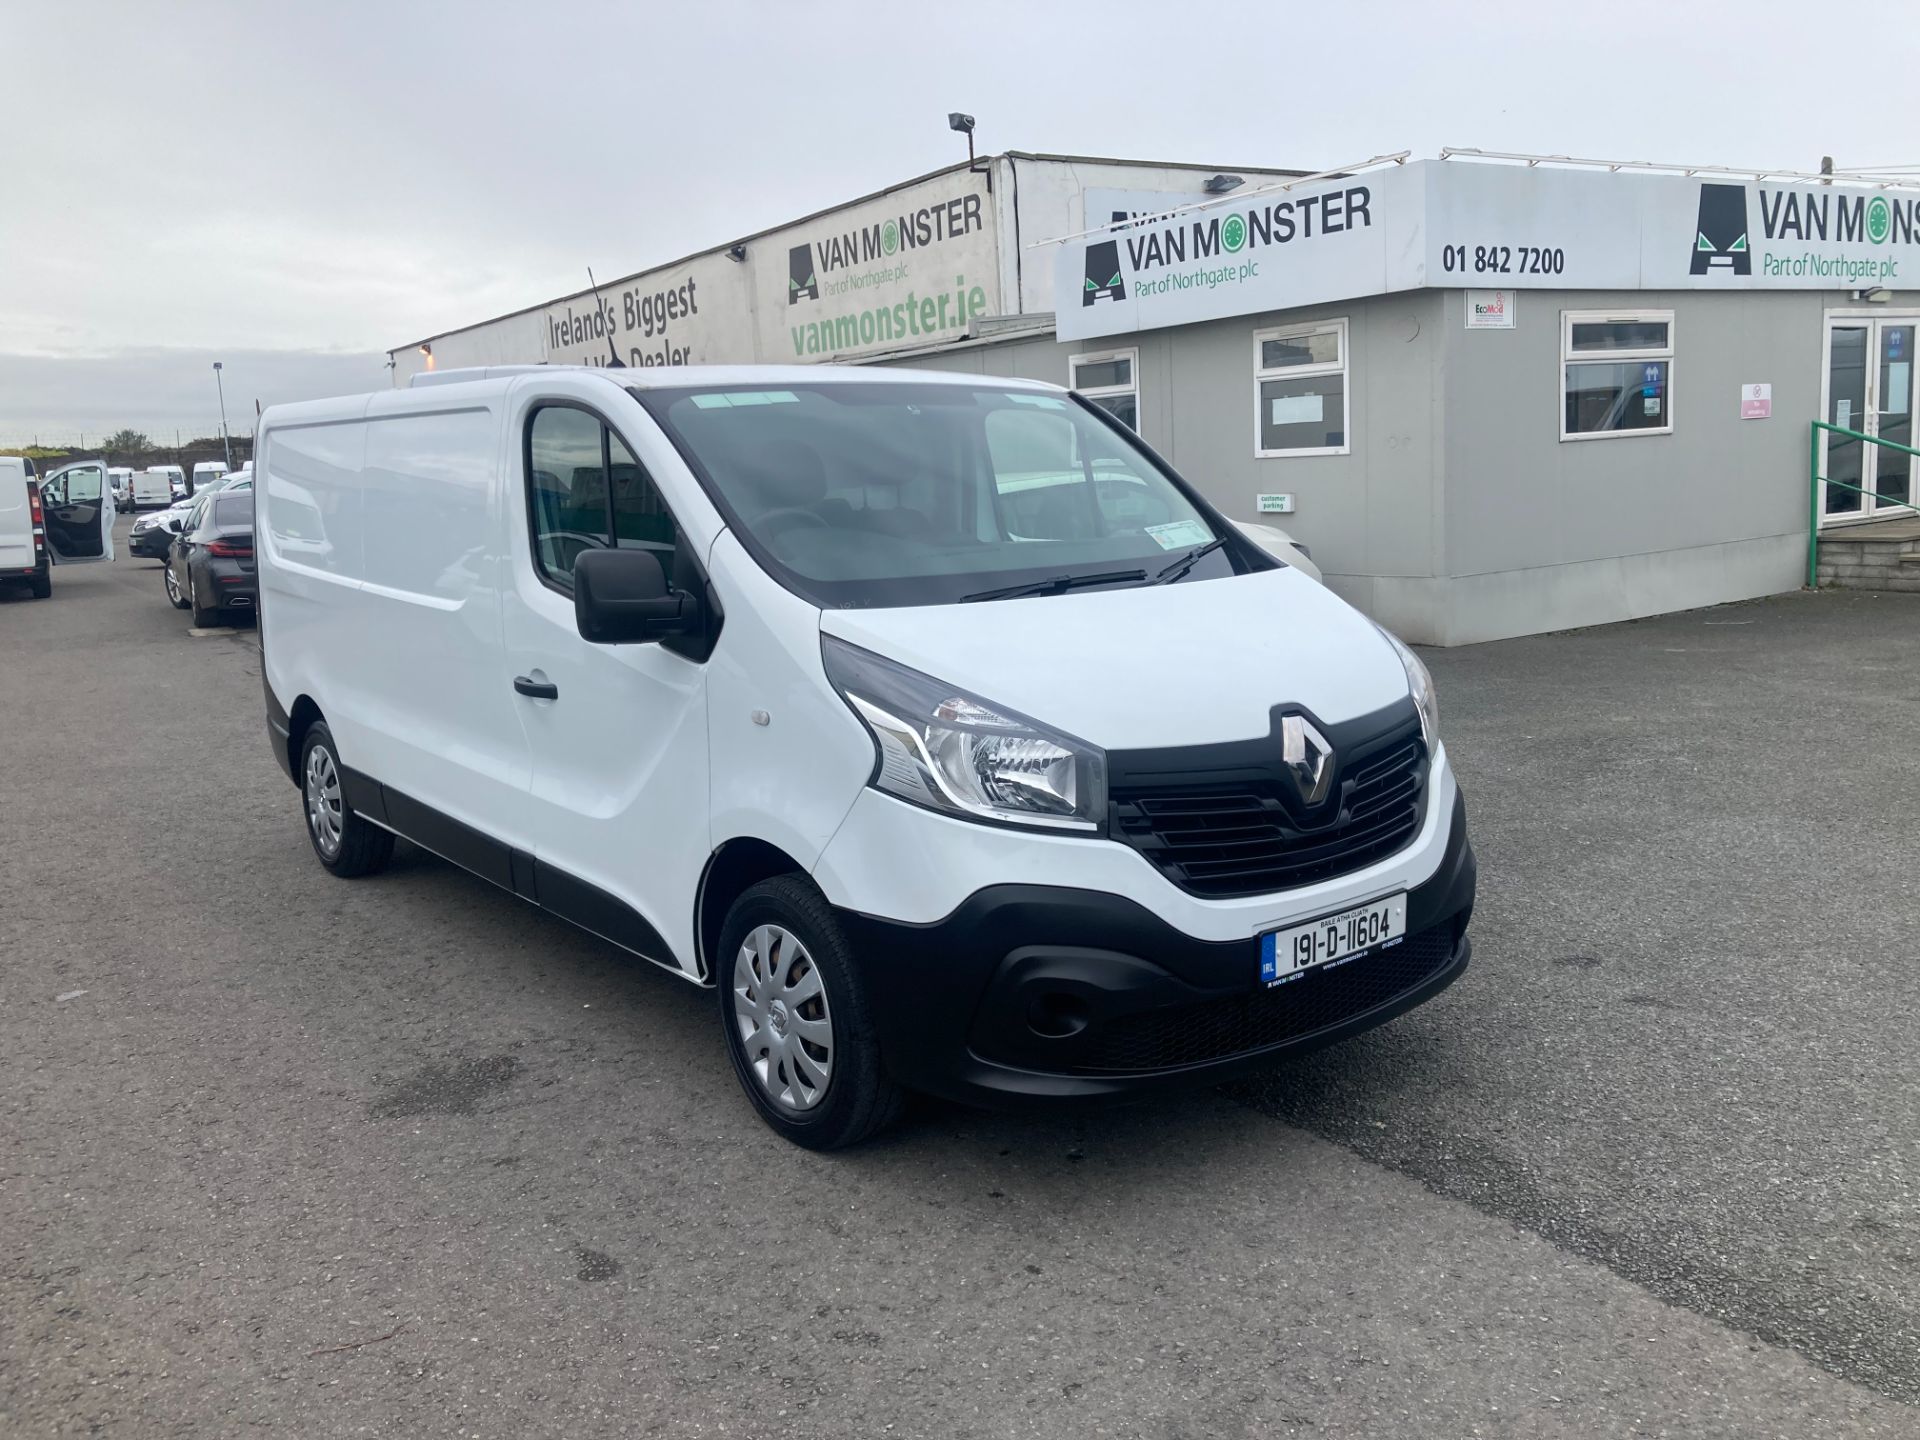 2019 Renault Trafic LL29 DCI 120 Business (191D11604) Thumbnail 1